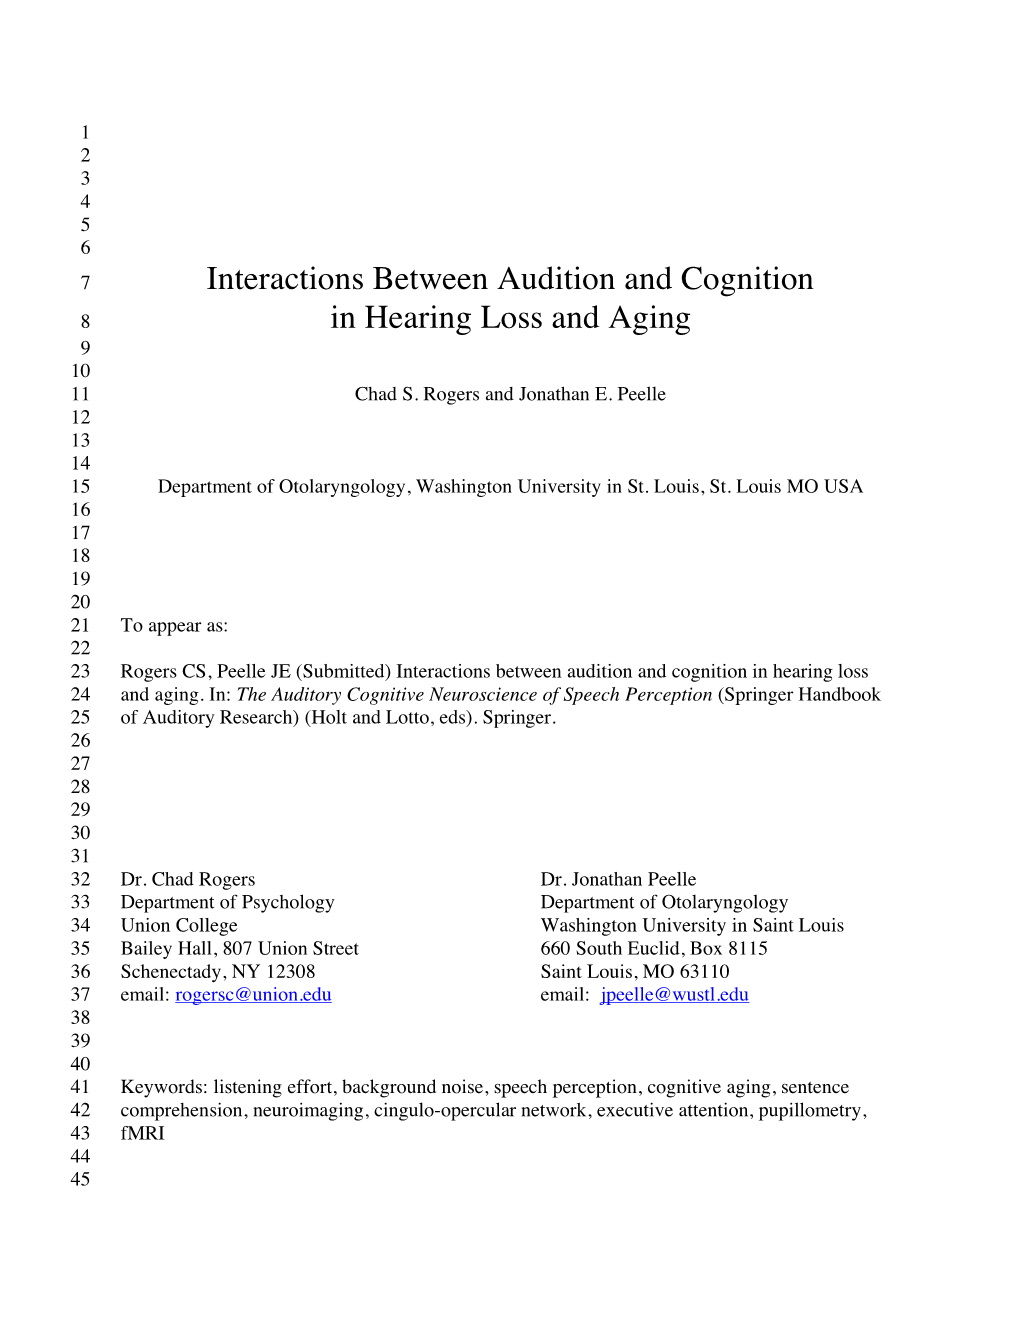 Interactions Between Audition and Cognition in Hearing Loss and Aging